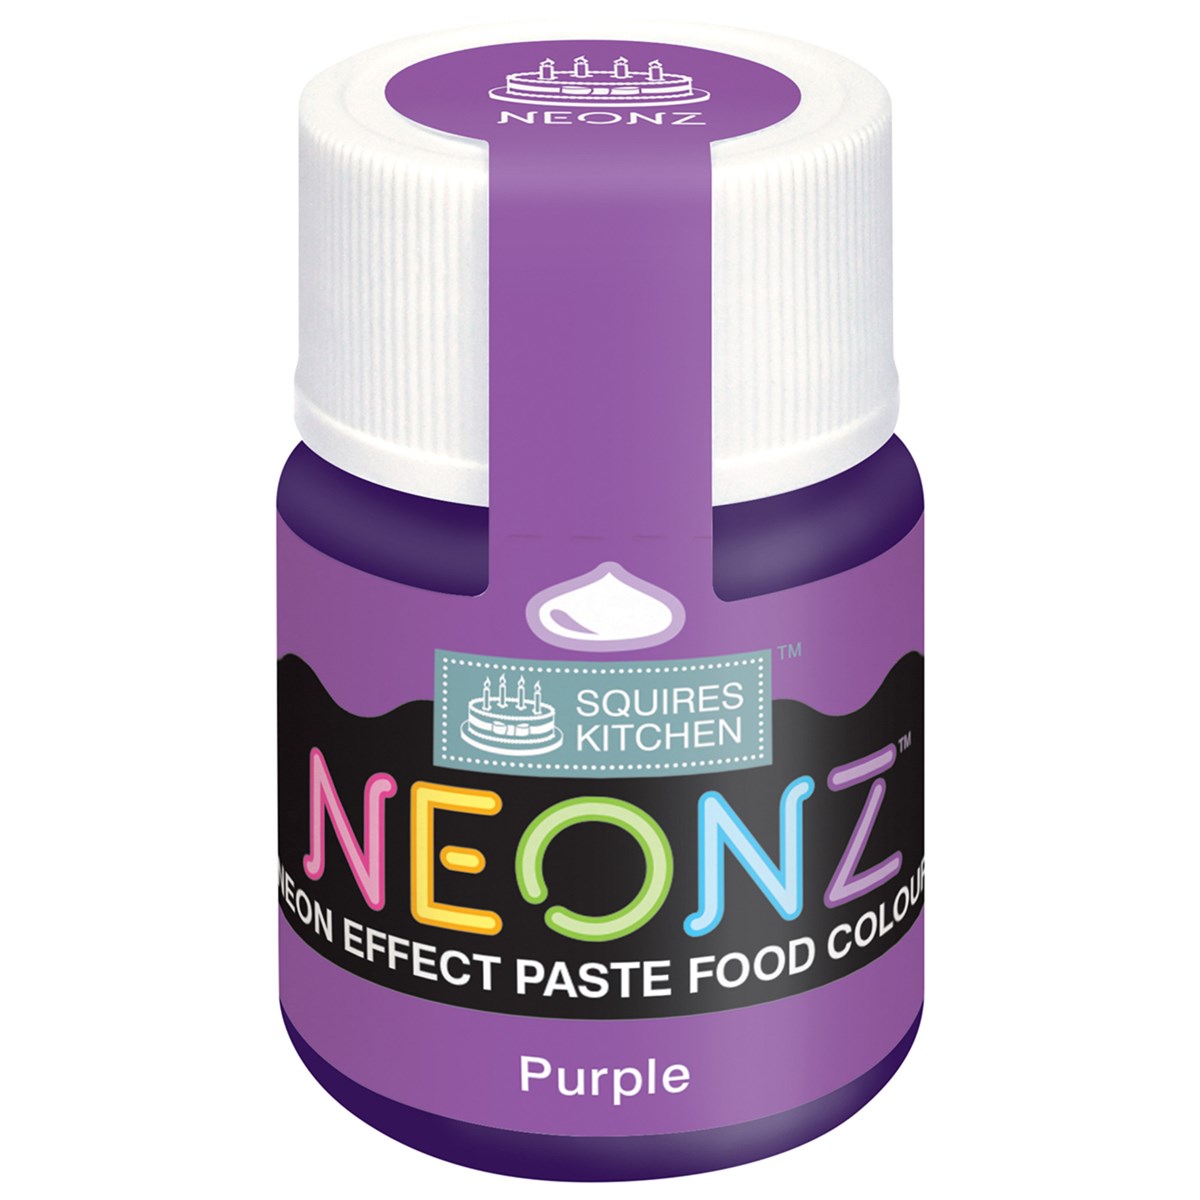 Squires Kitchen Neonz Neon Effect Concentrated Paste Food Colouring - 20g - Purple